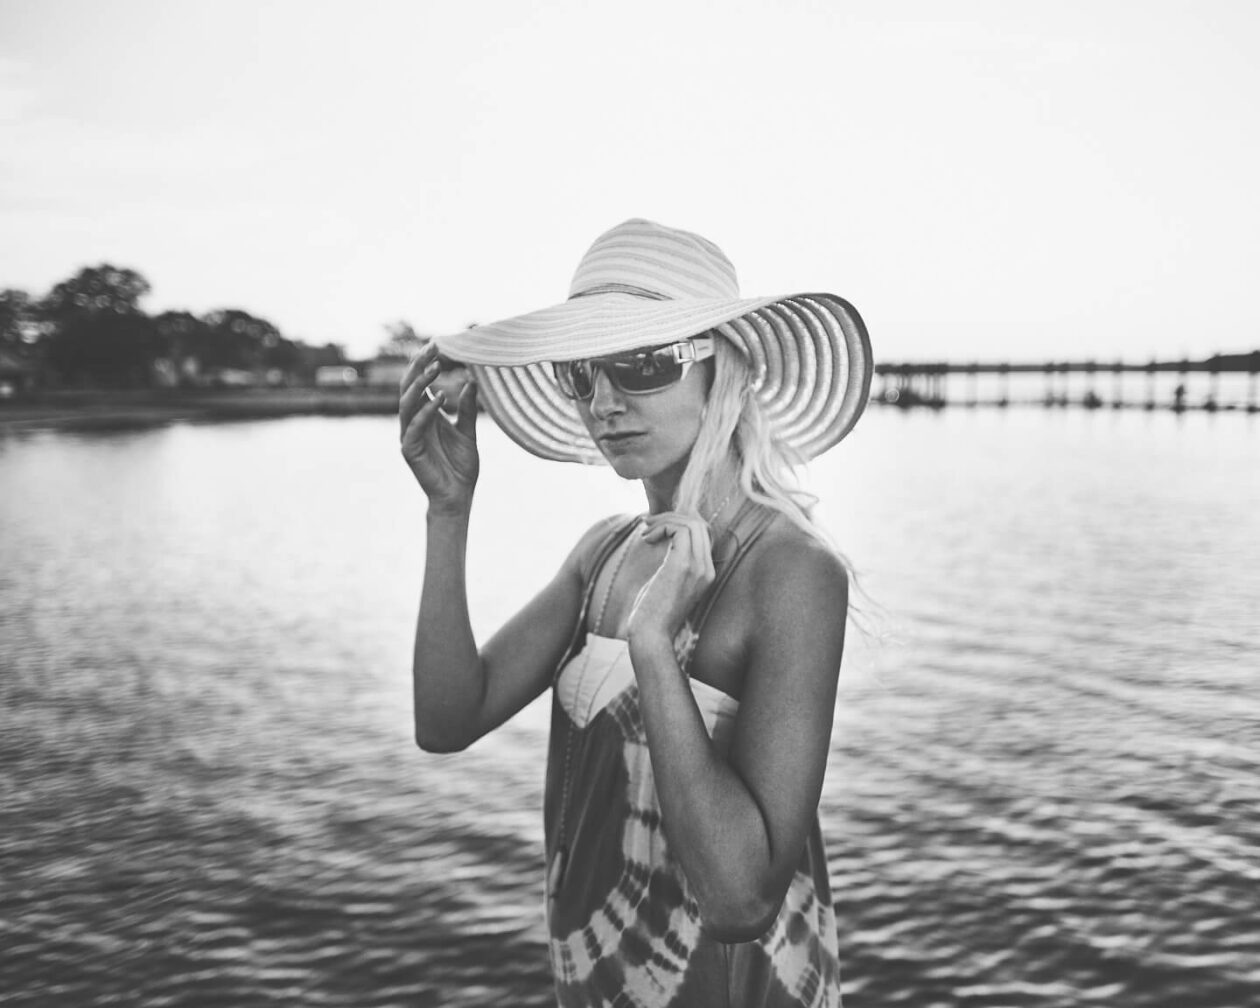 Fuji X Pro2 with xf 16mm f1.4 - Black and White sunset portrait photography in Belmar with model Katie